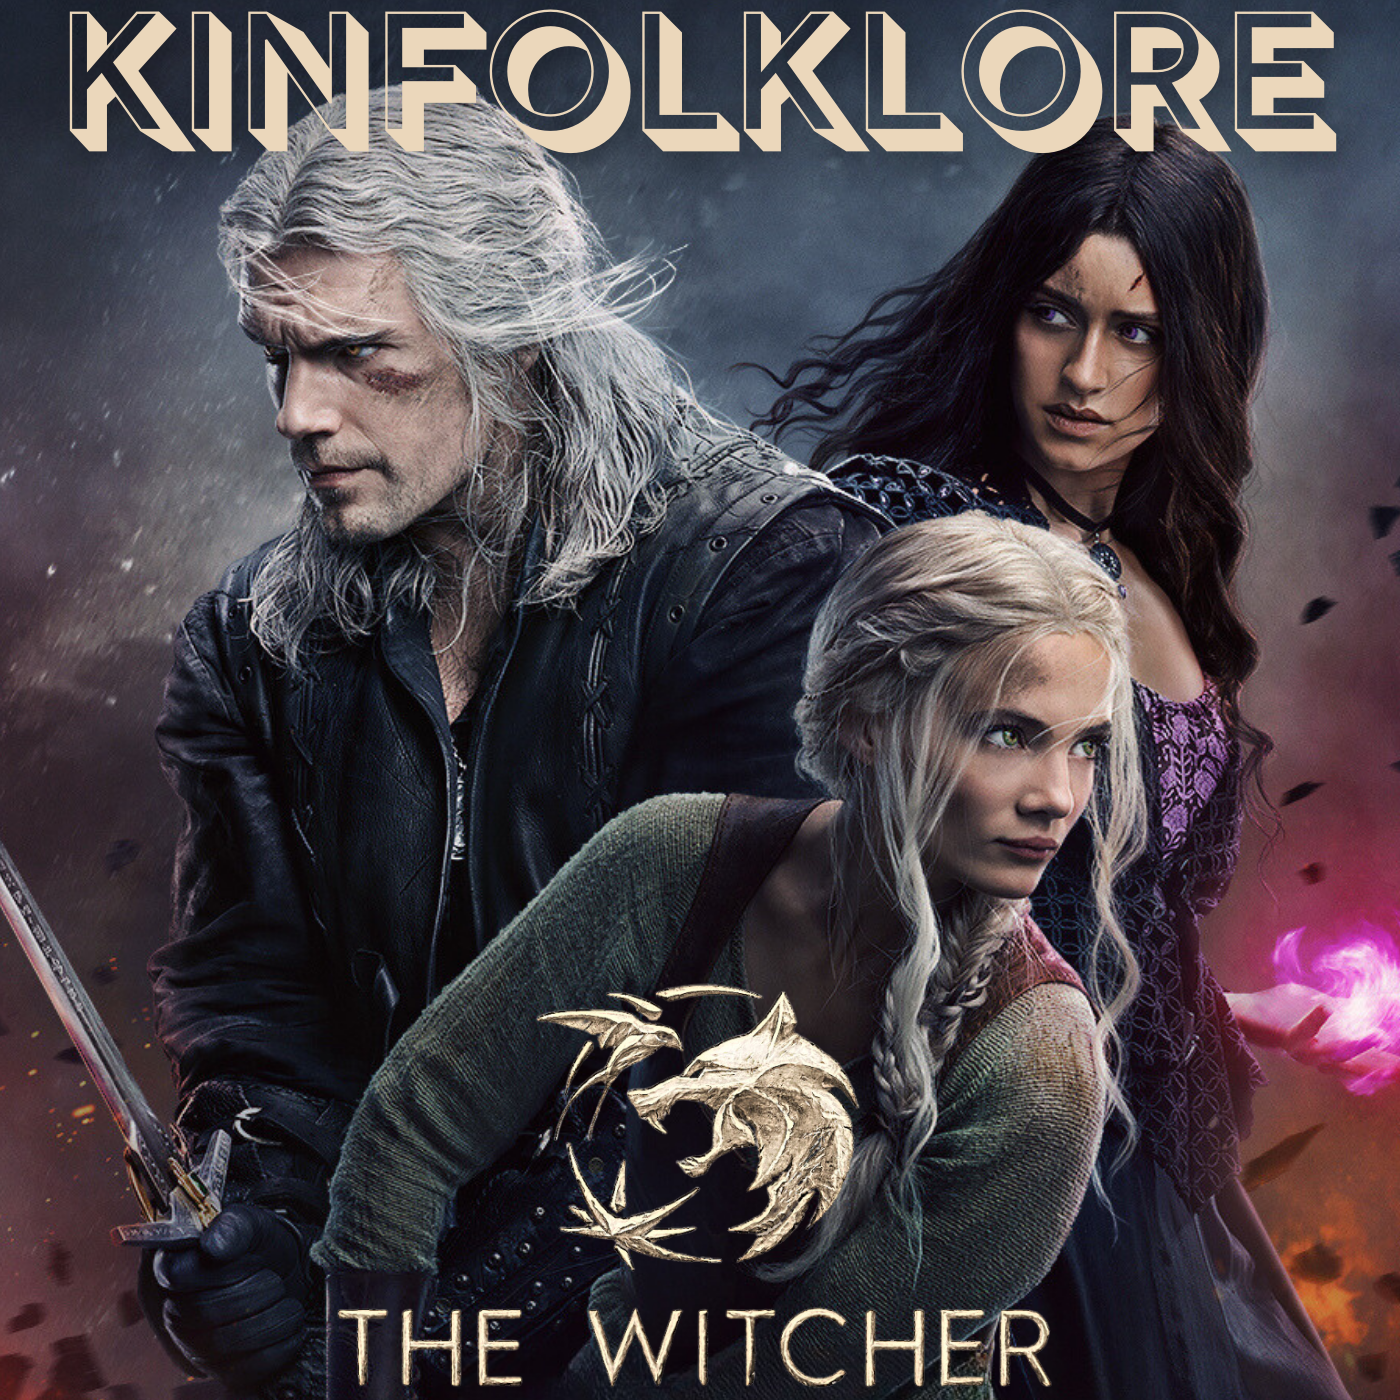 S11: Kinfolklore: The Witcher Season 3 Preview